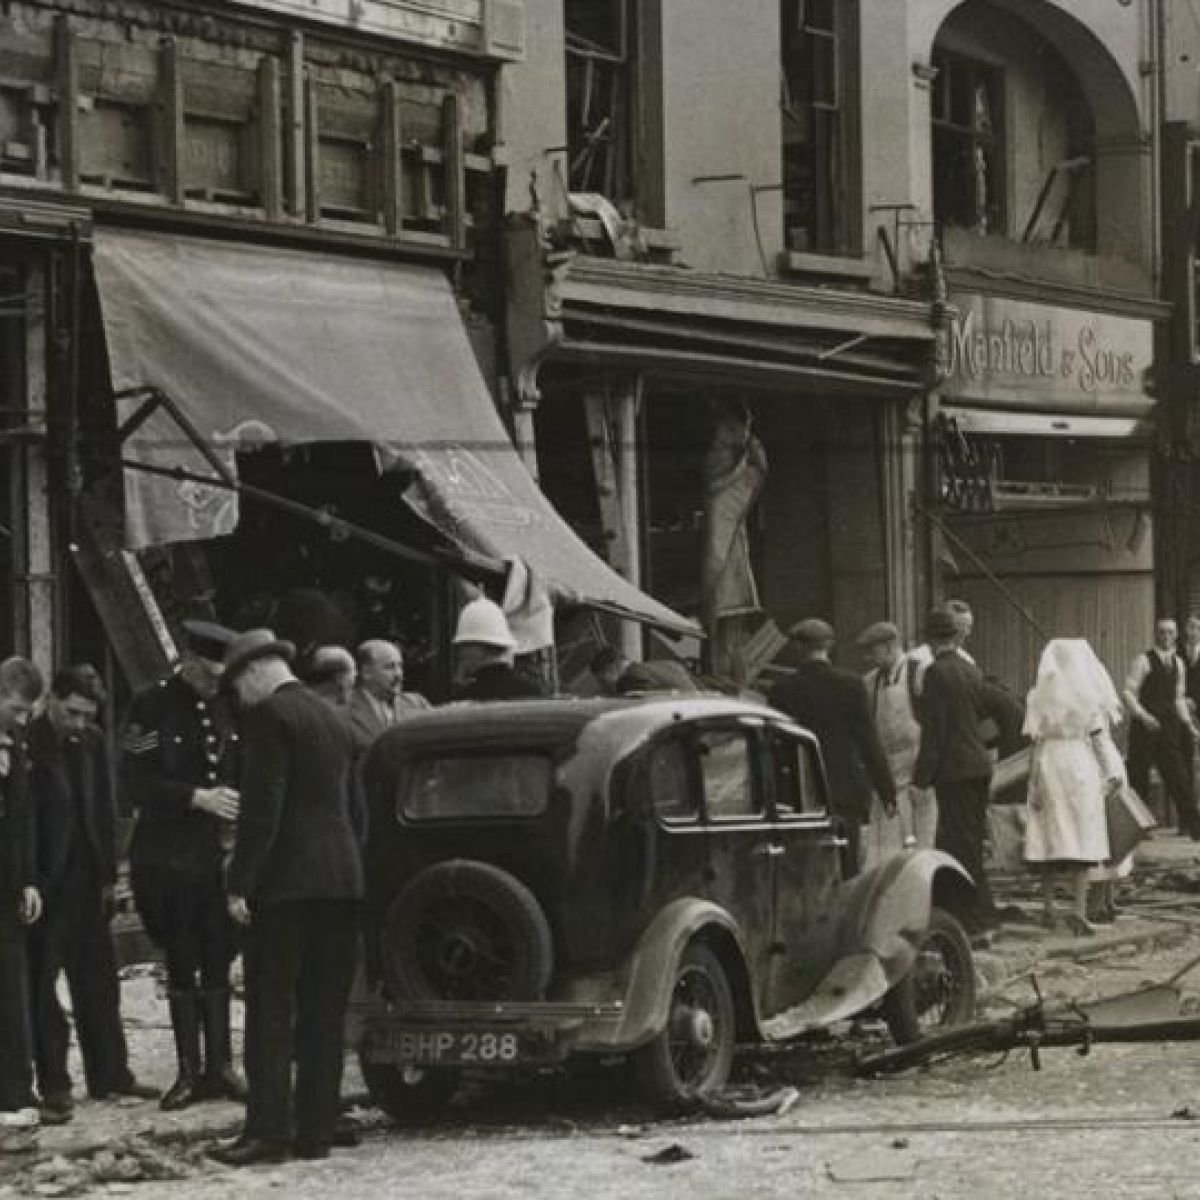 The War Office's core aim is not to inflame tensions.The IRA had bombed Coventry on 23 August 1939 and killed a number of civilians w. a bicycle bomb.* This backfired & greatly damaged popular British support for a political solution for the situation.*A pivotal event. /5